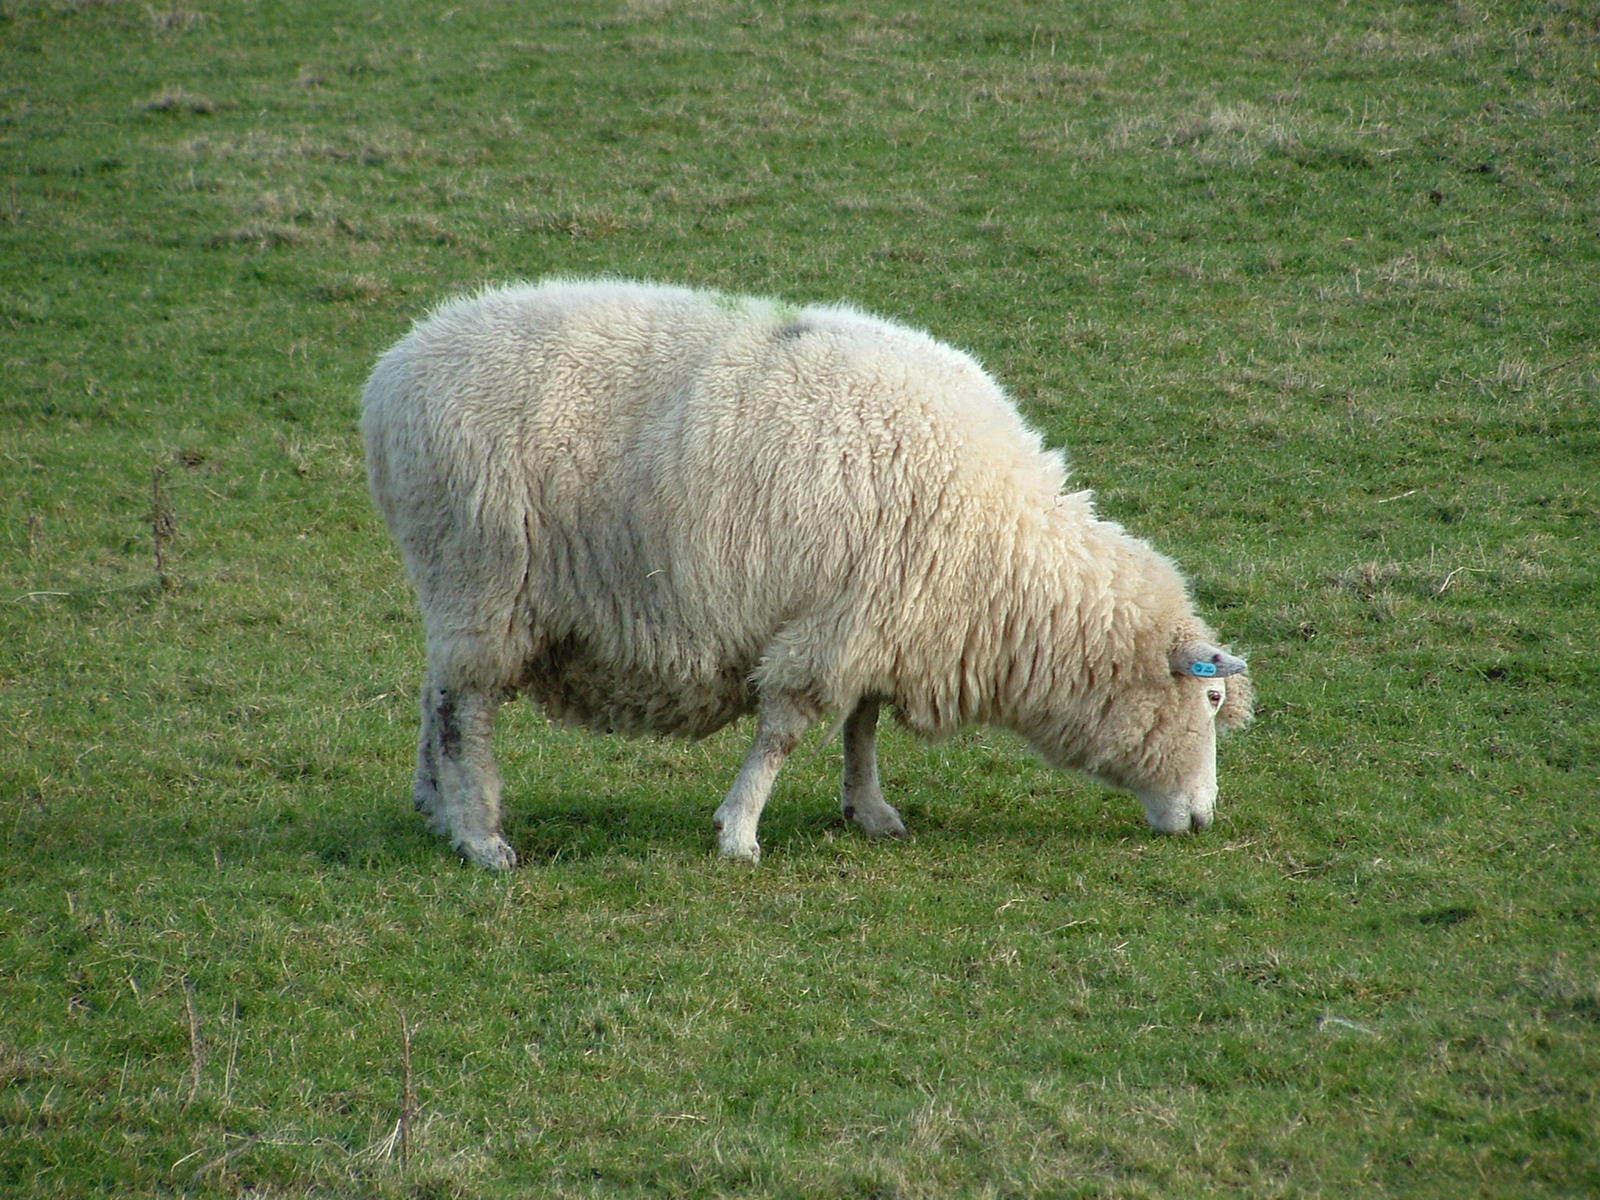 the sheep is grazing on grass in the pasture